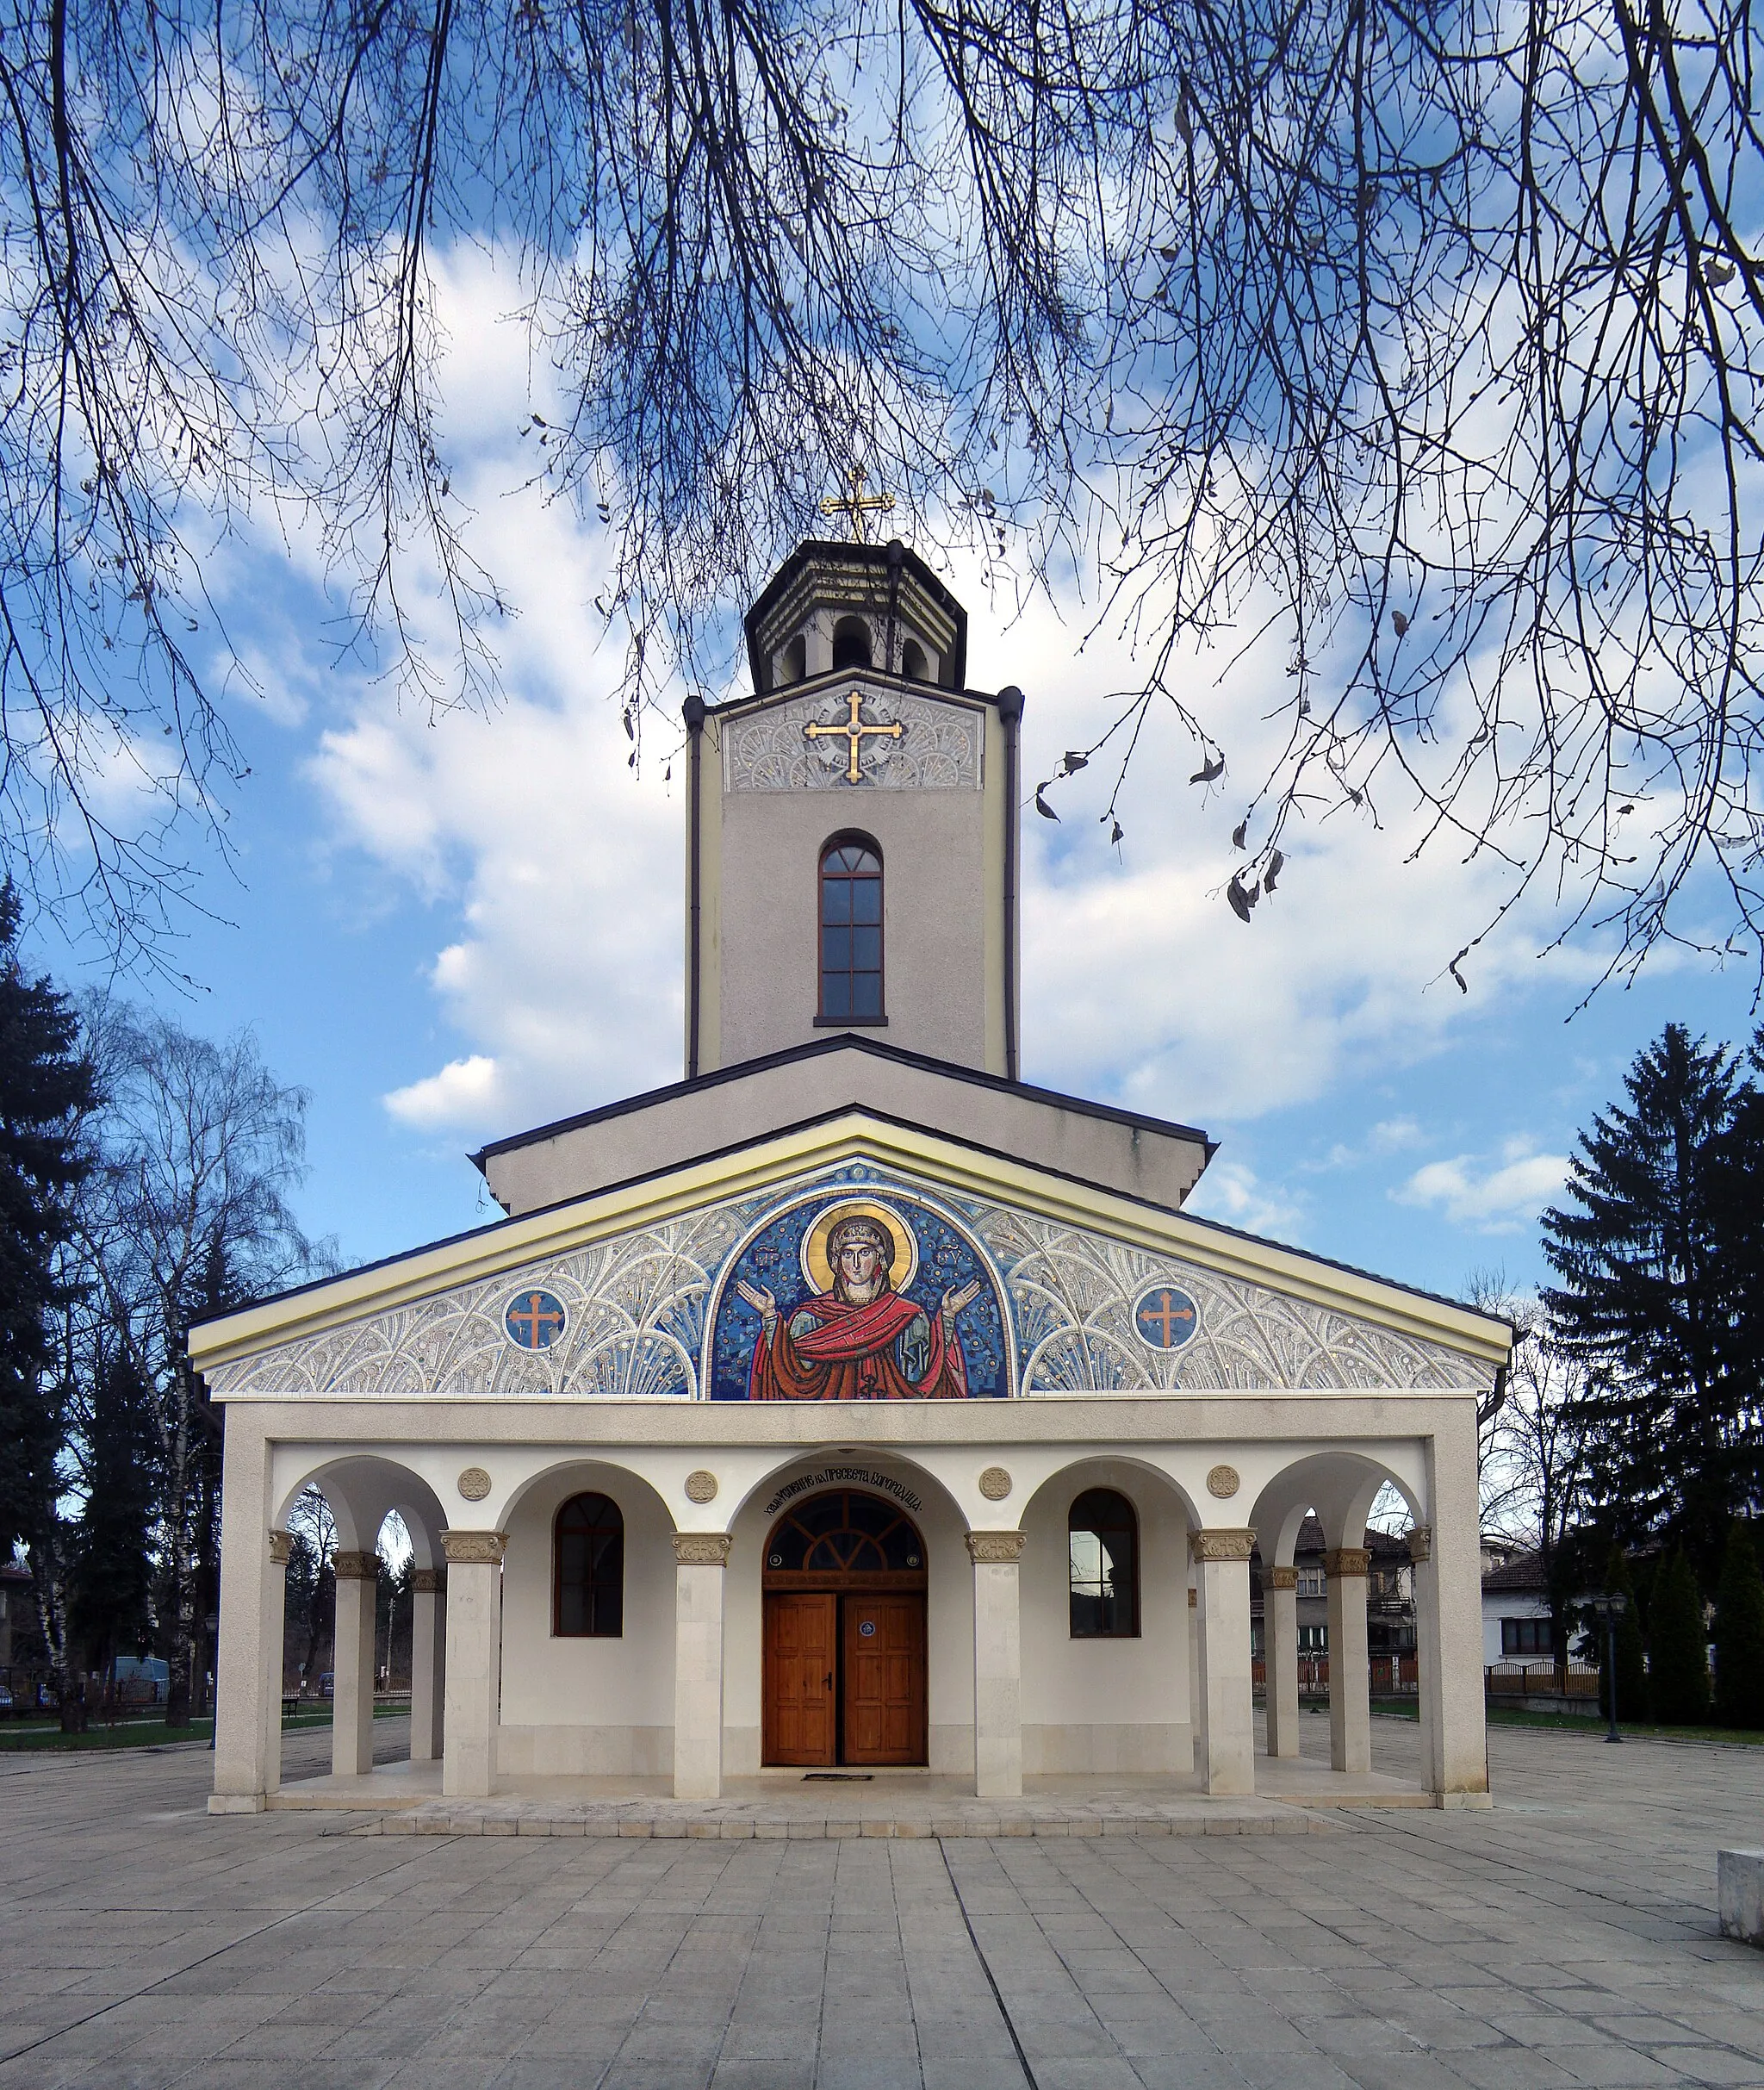 Photo showing: The church "Dormition of the Mother of God church" in Botevgrad, Bulgaria.